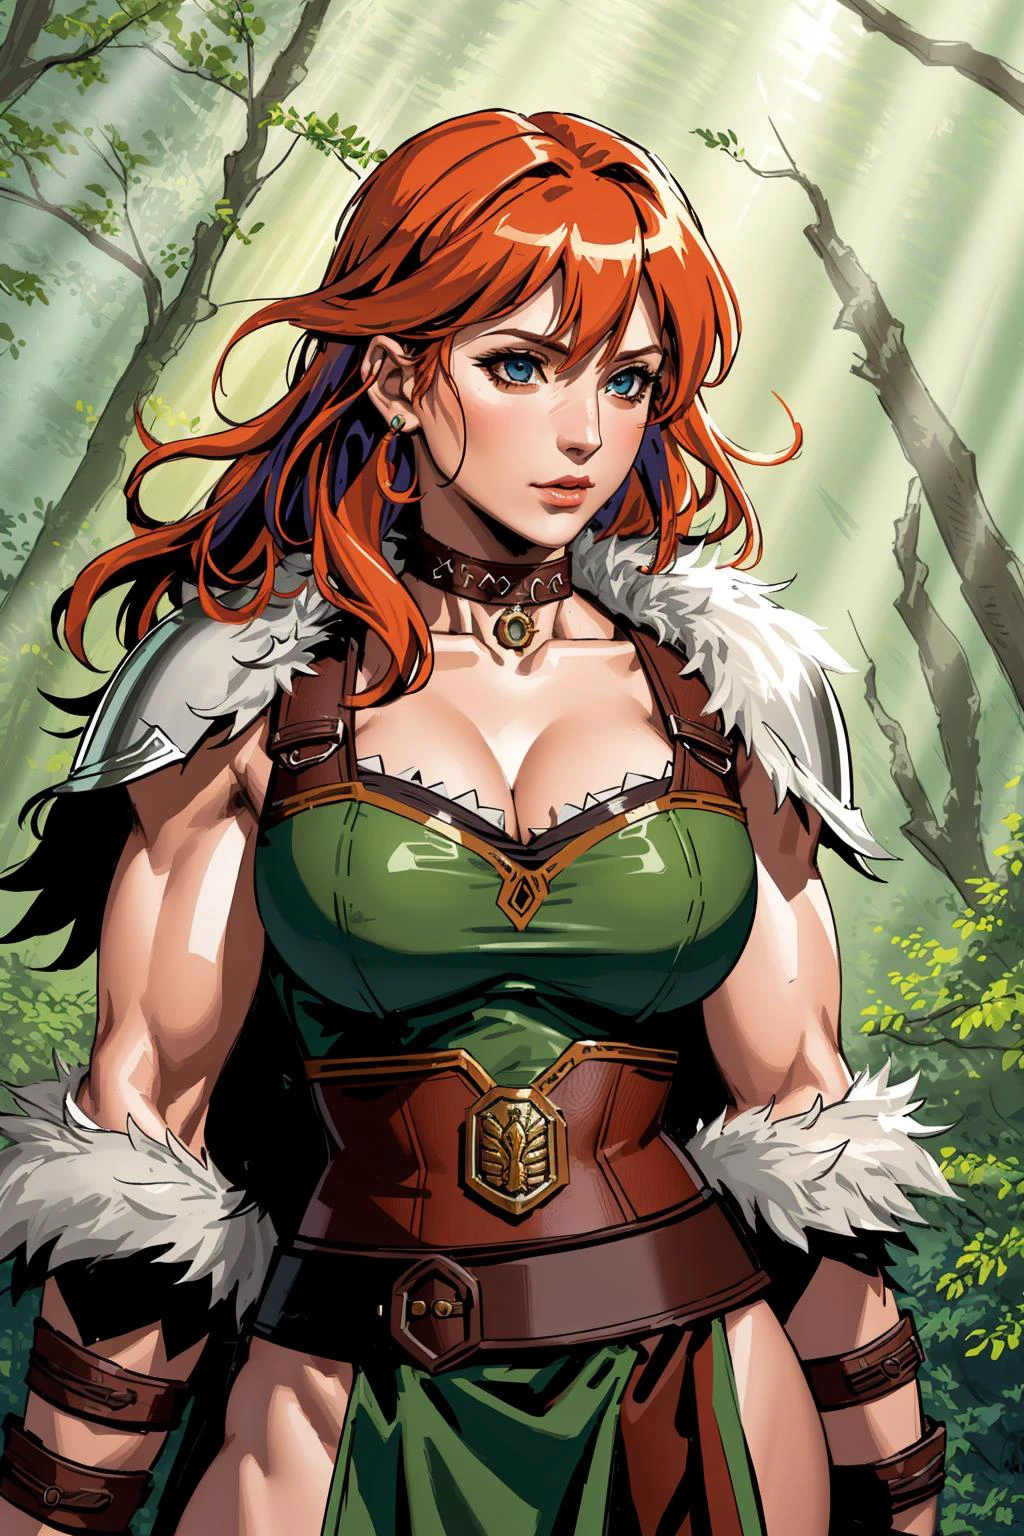 barbarian, amazon goddess, sexy armor, vivid colorful hair, pale skin, breasts, barbarian leather armor, choker minidress, savage power, light rays, god rays, furry armor, Jurassic, forest, leaves, muscular, bodybuilder, realistic